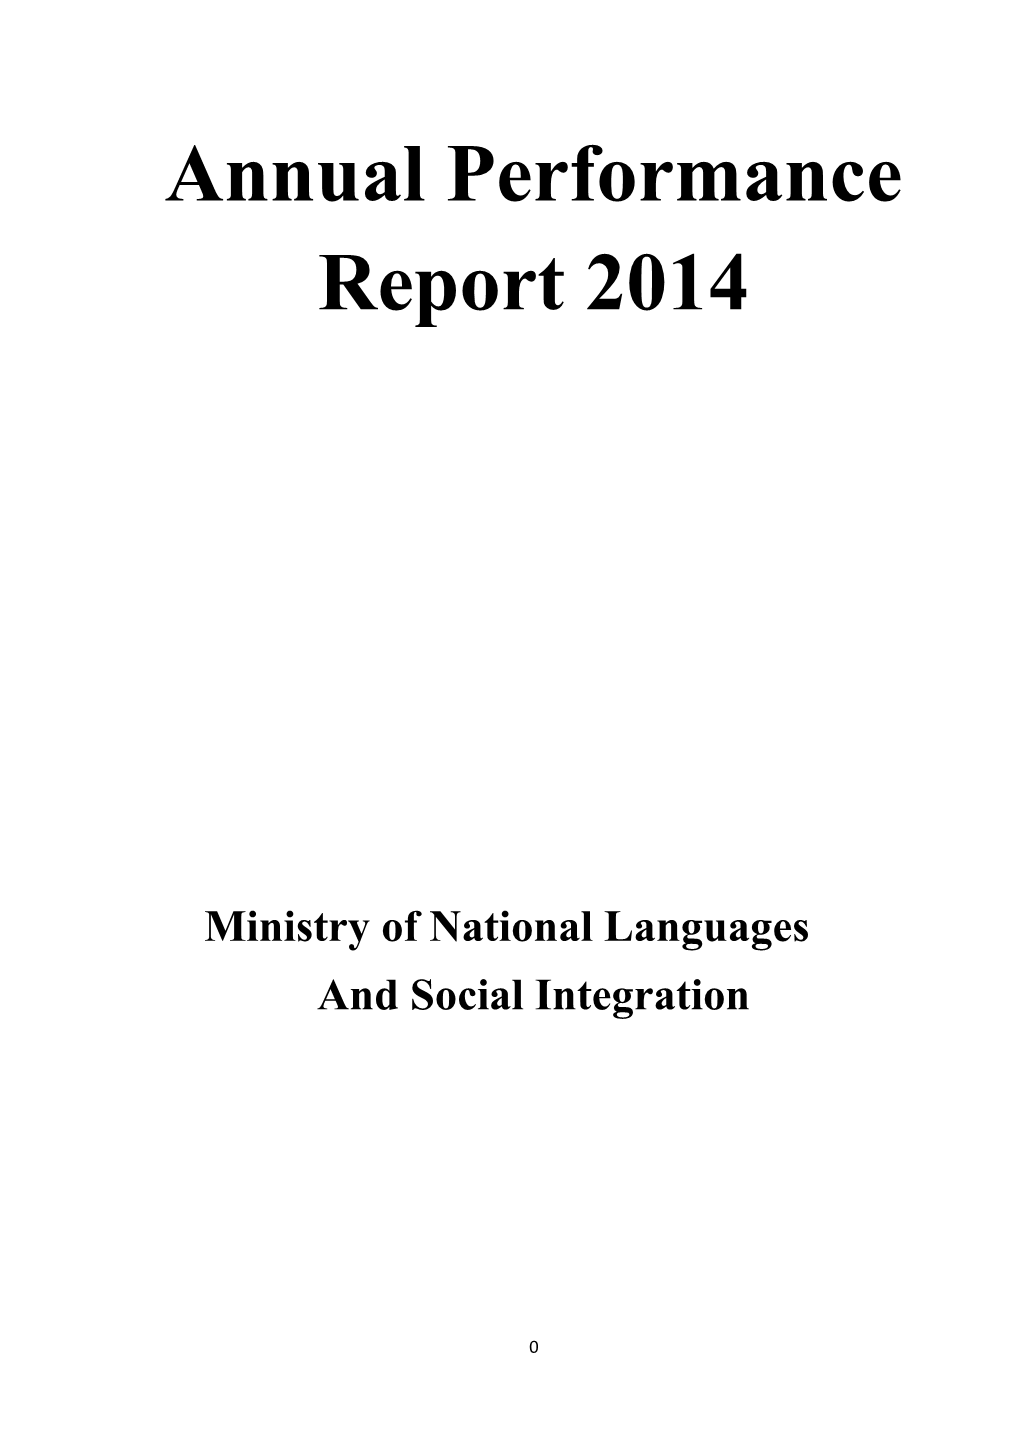 Ministry of National Languages and Social Integration for the Year 2014